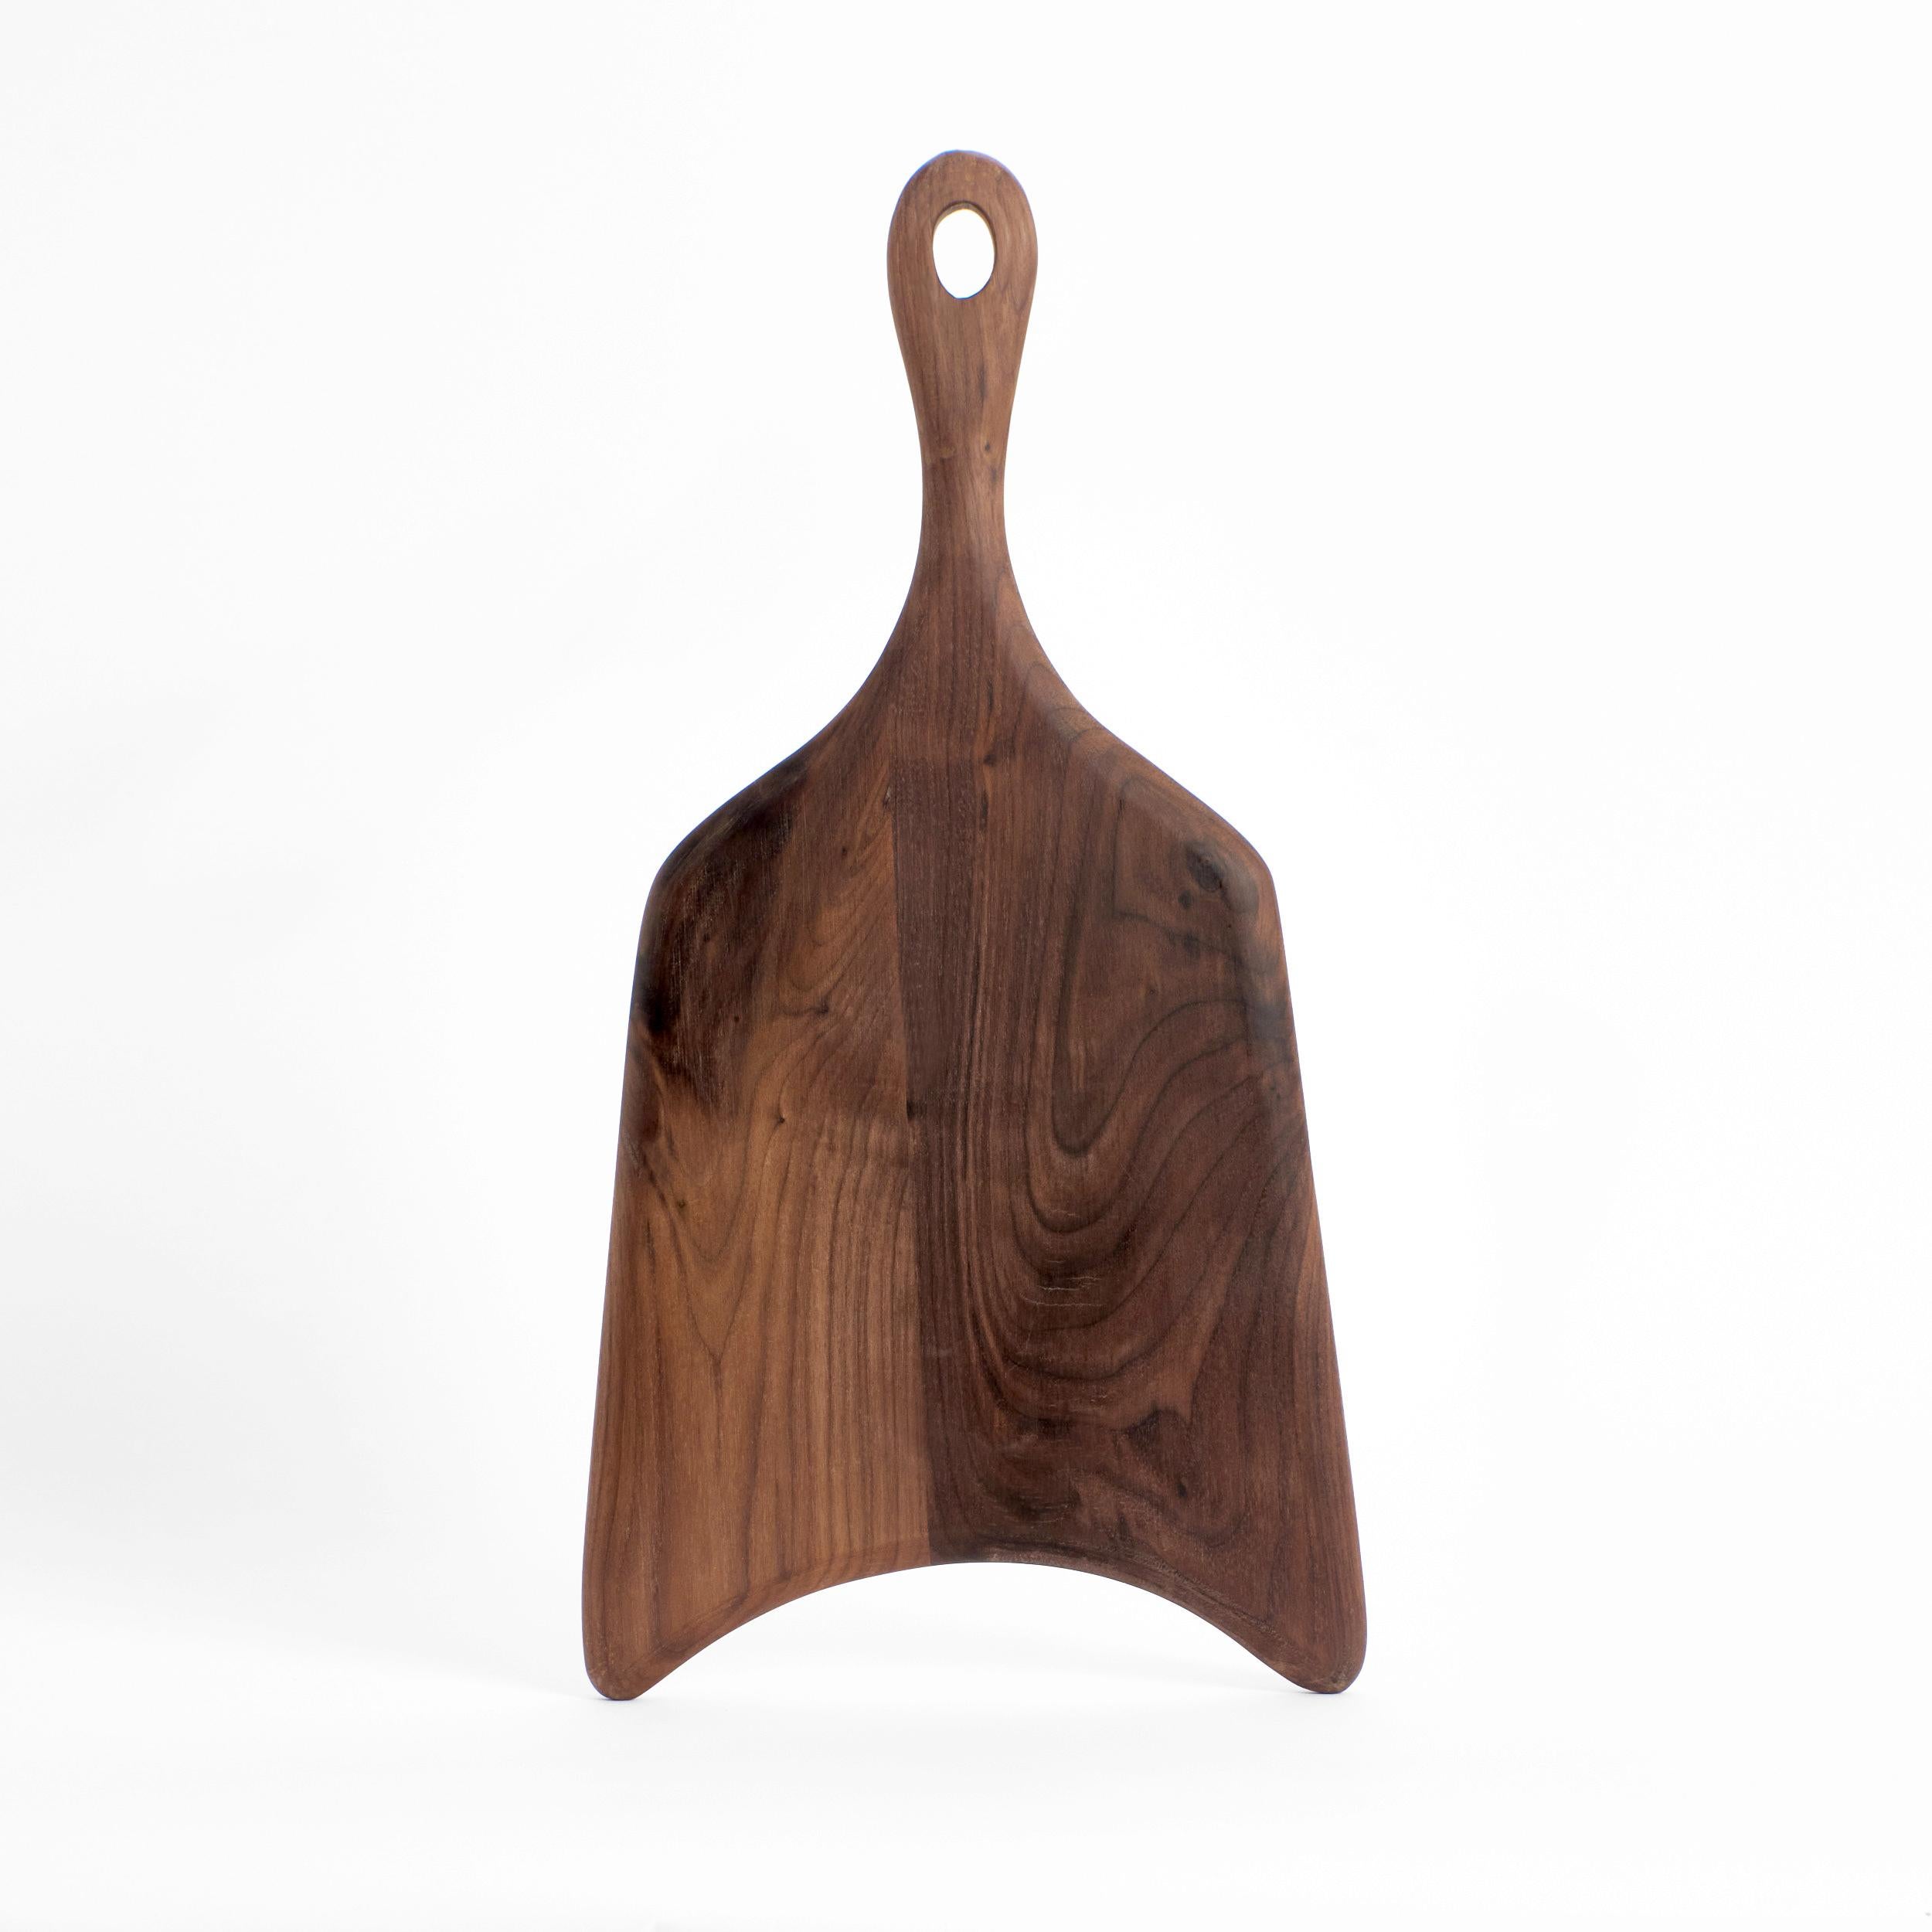 Set of 2 Board 56 in Walnut by Project 213A
Dimensions: D 56.5 x W 29 x H 2 cm
Materials: W alnut wood. 

This large shaped board is hand-carved from walnut. The boards as an individual or as part of the family will become a key item in every